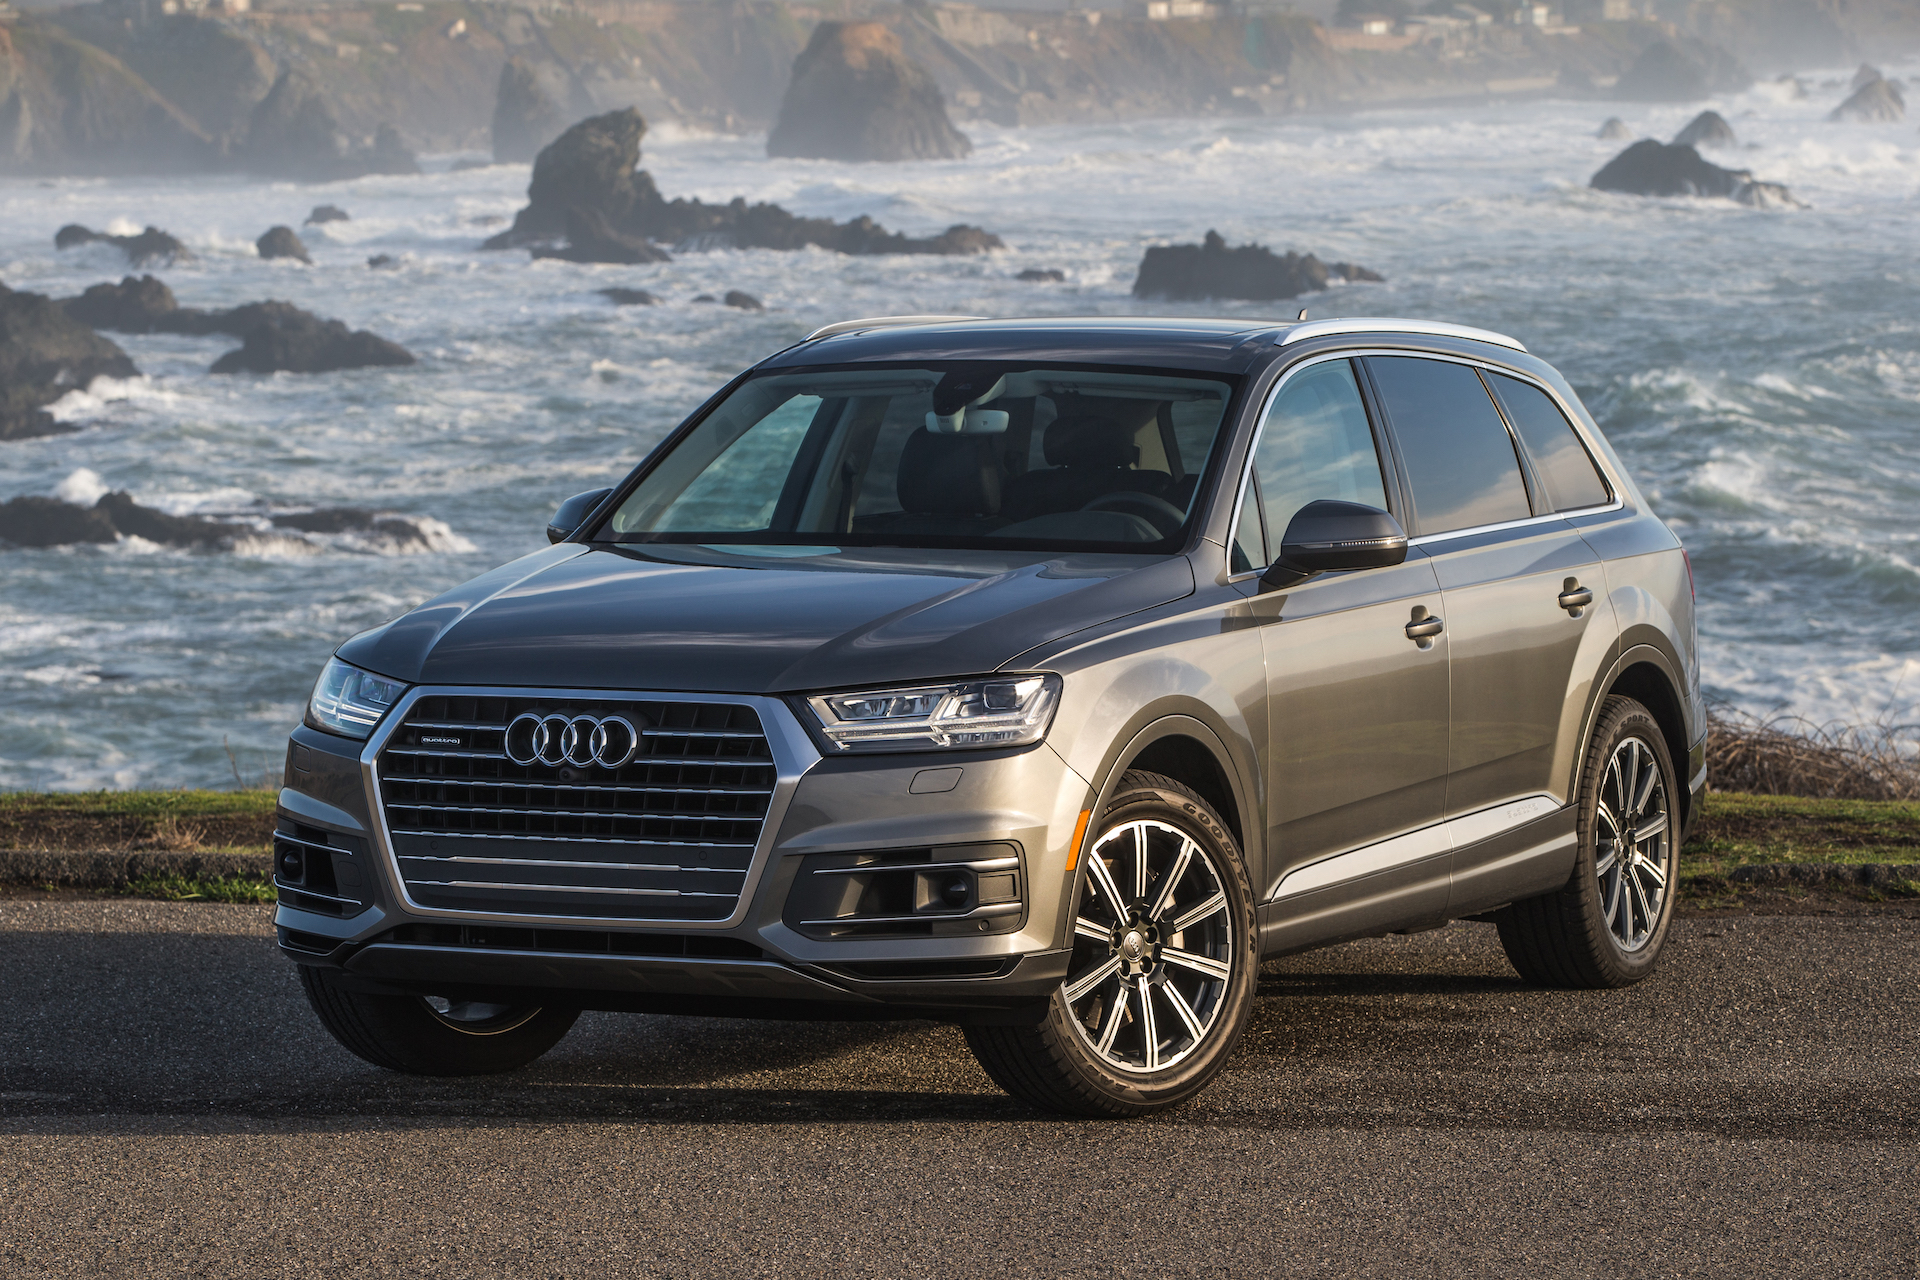 2019 Audi Q7 Review, Ratings, Specs, Prices, and Photos - The Car Connection